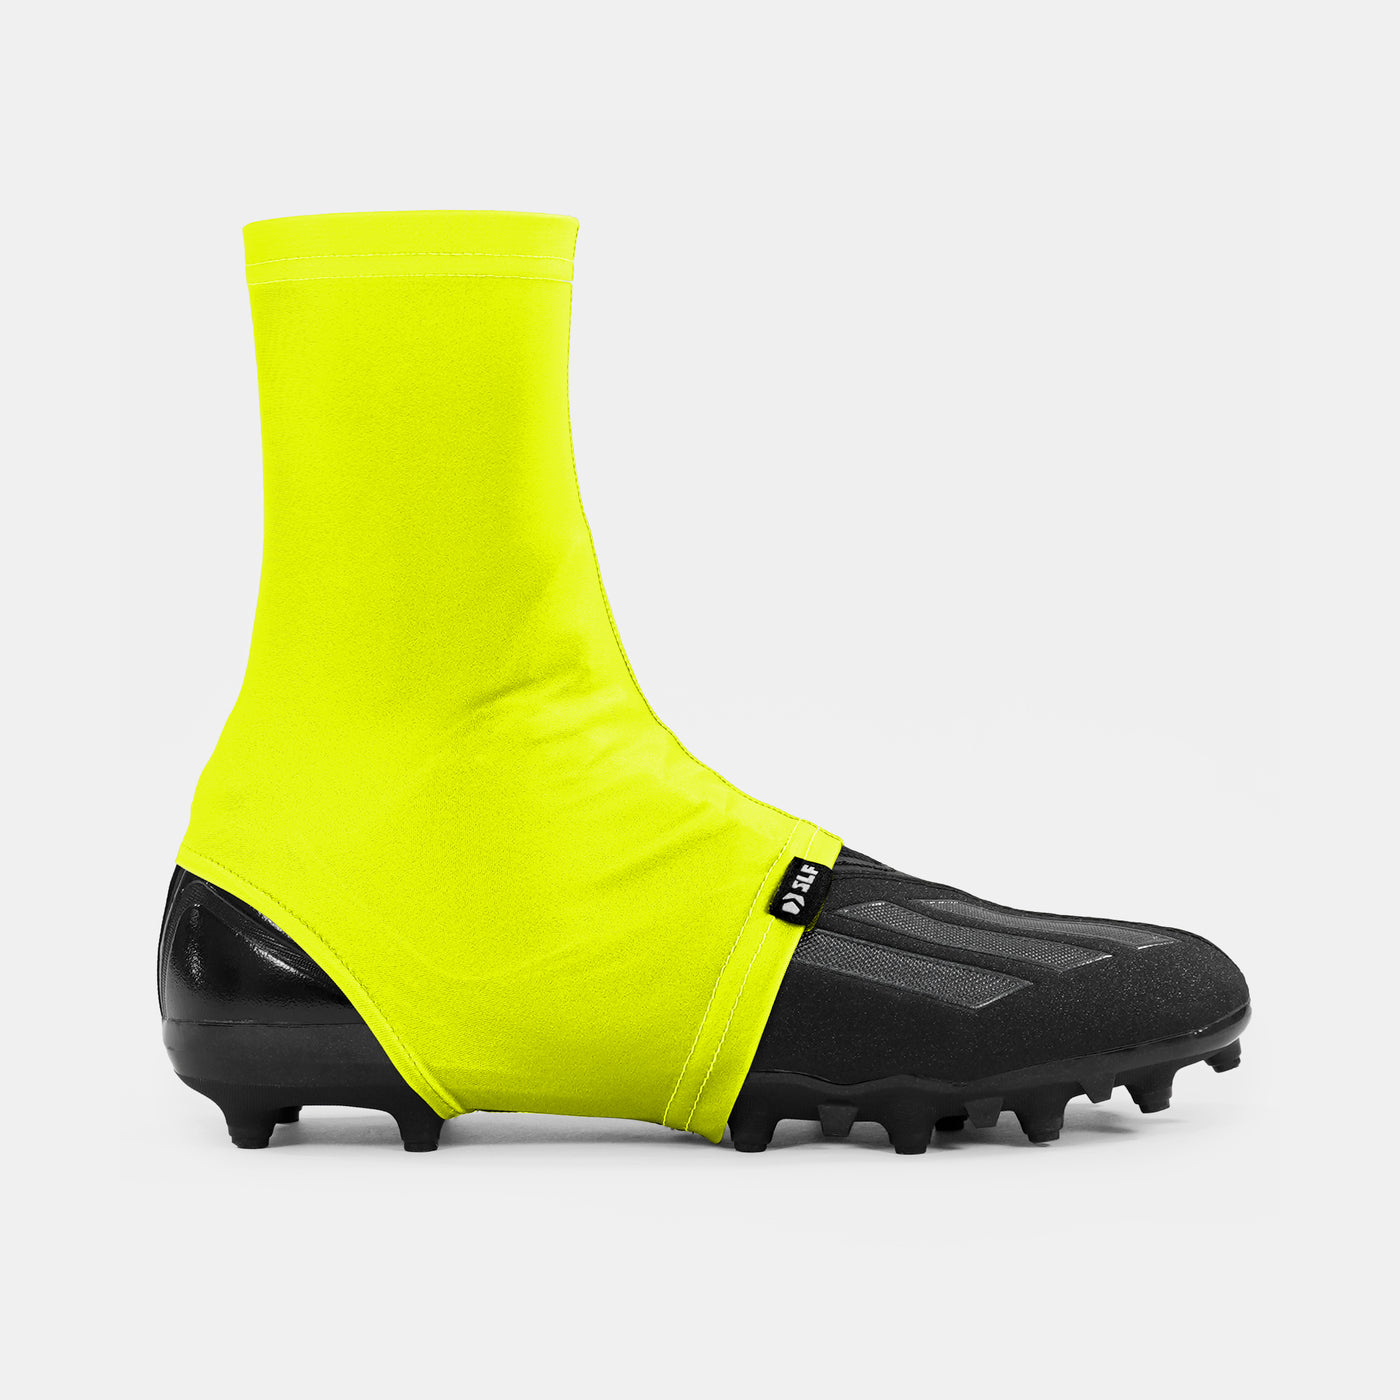 Safety Yellow Spats / Cleat Covers